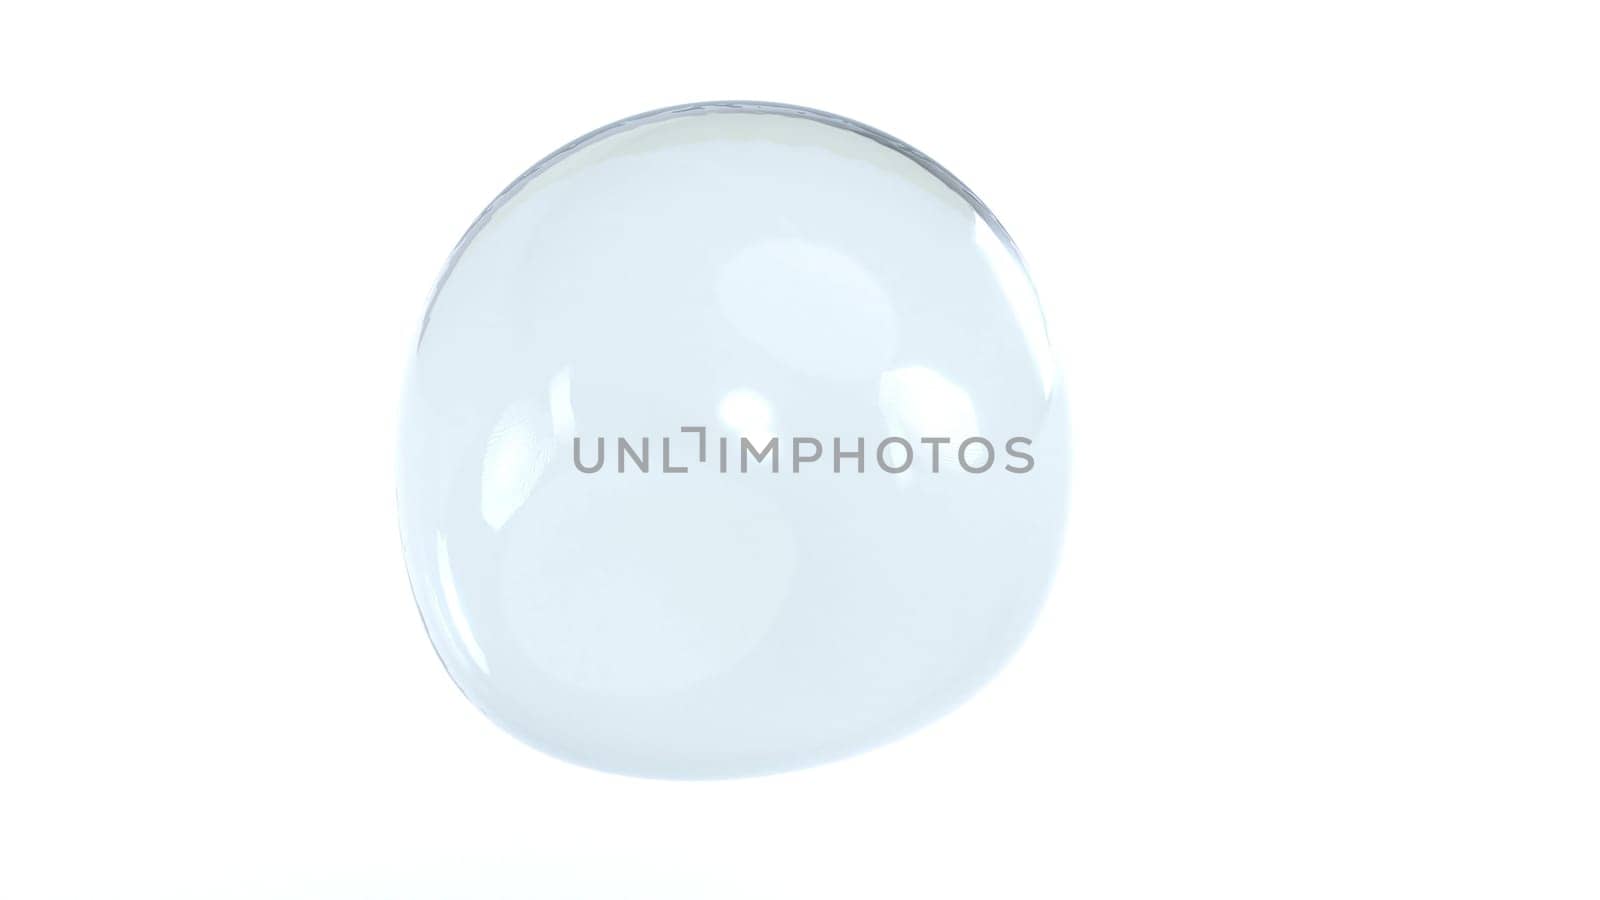 Sphere water glass isolate on white bg able to loop endless 3d render by Zozulinskyi